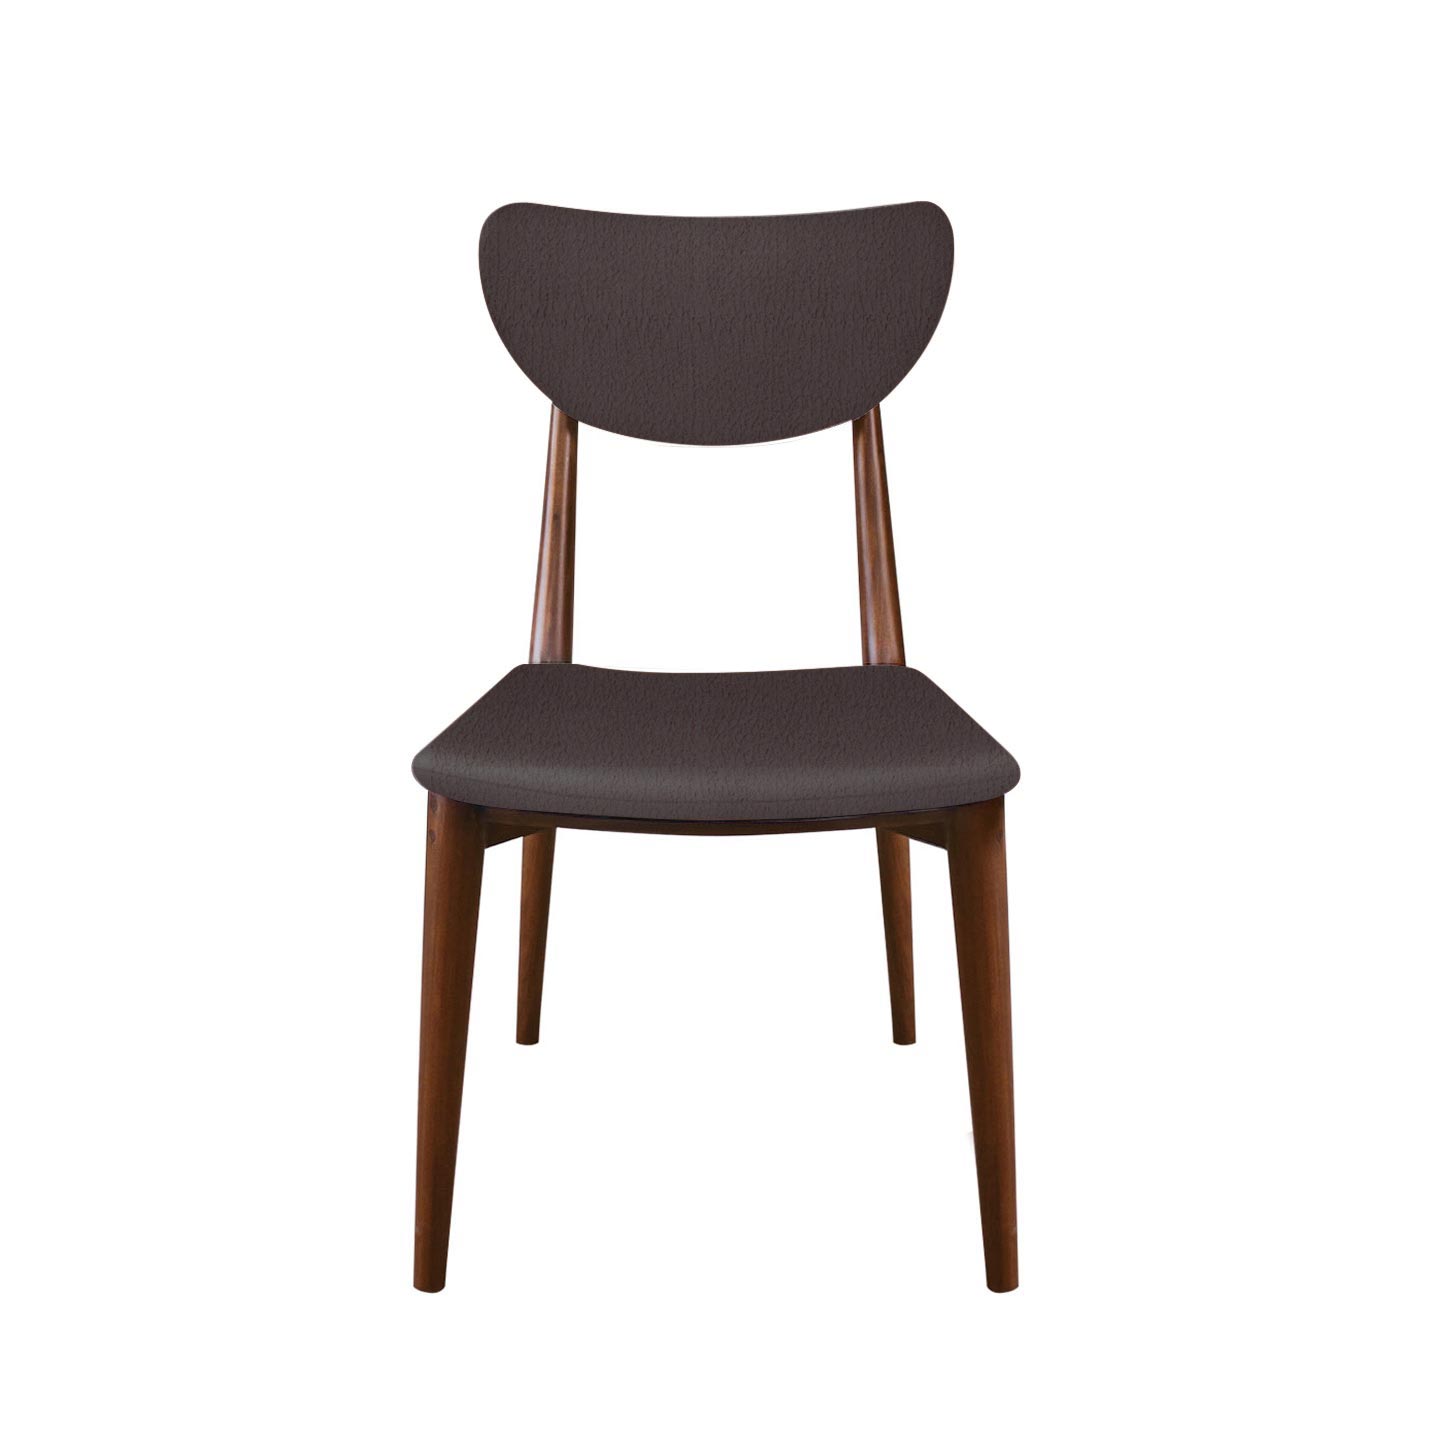 Williamsburg Faux Leather Dark Dining Chair